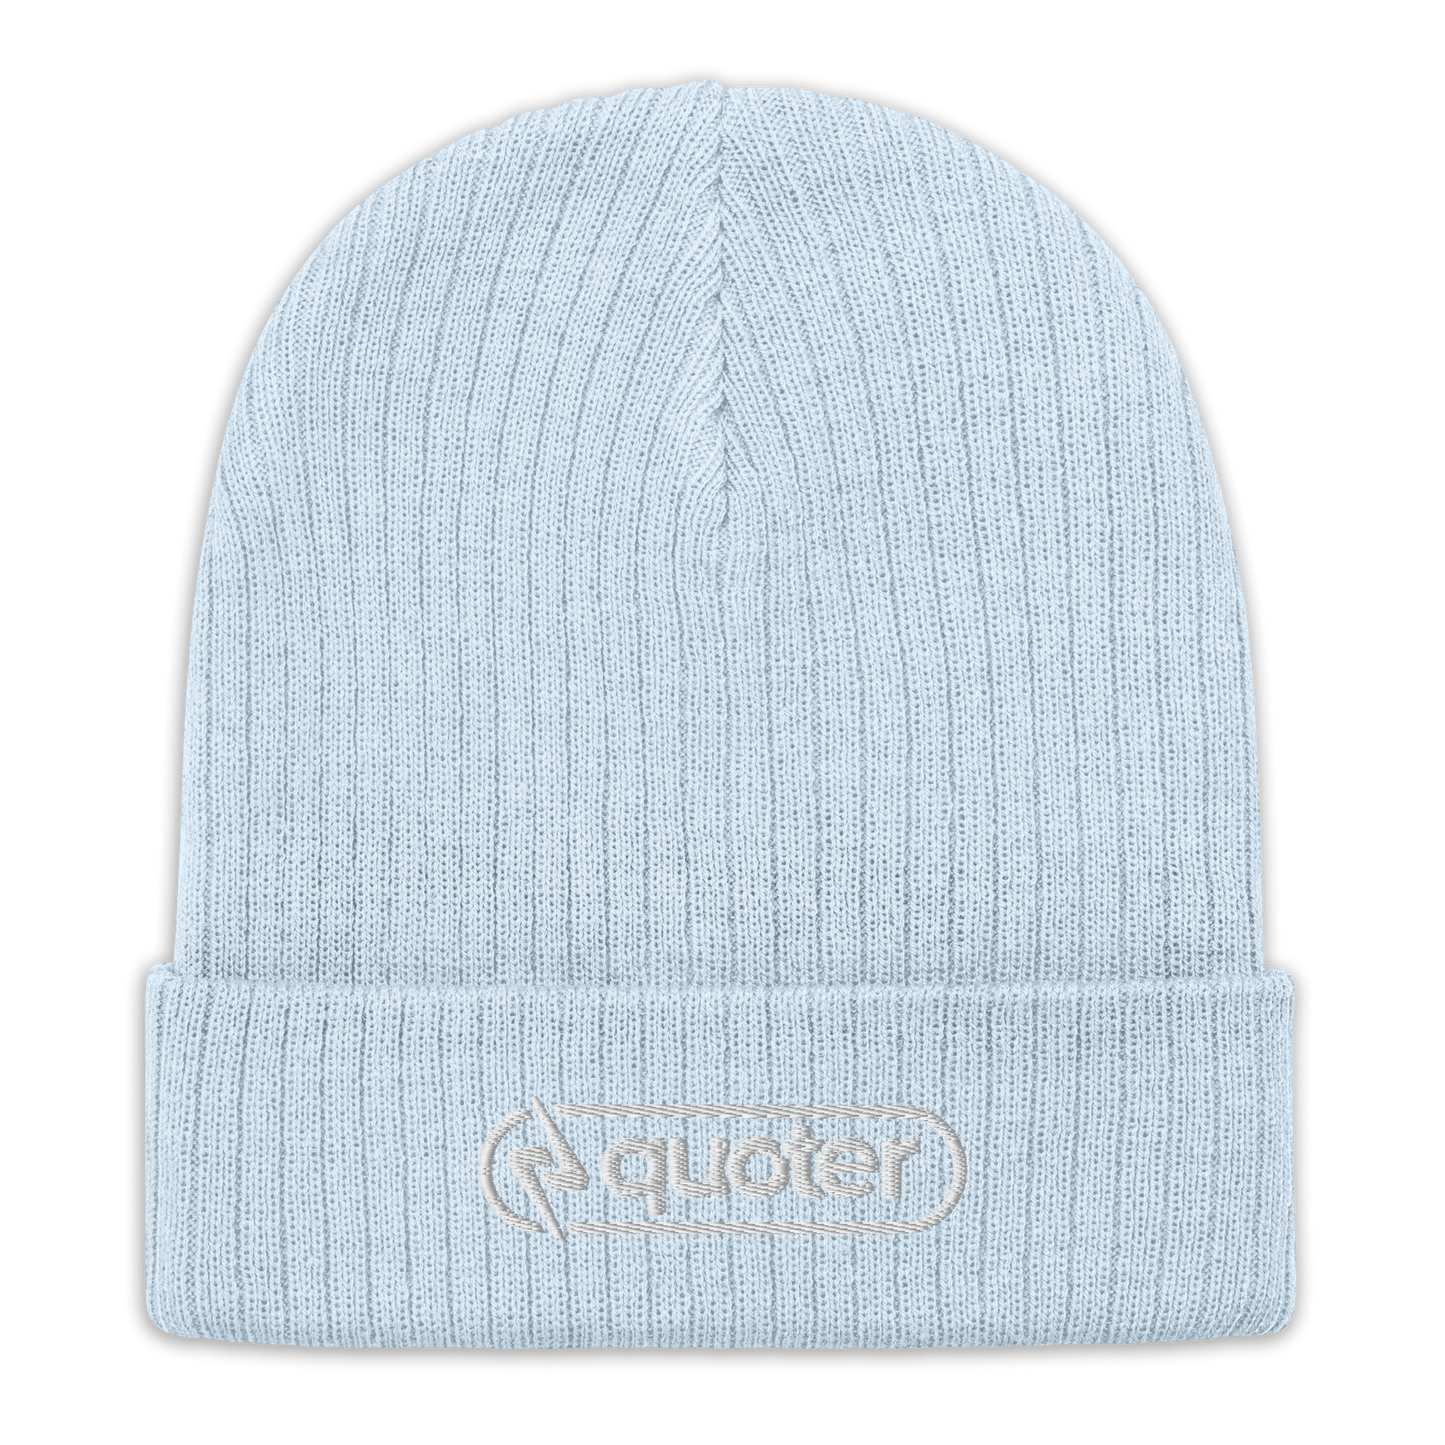 Quoter ribbed knit beanie